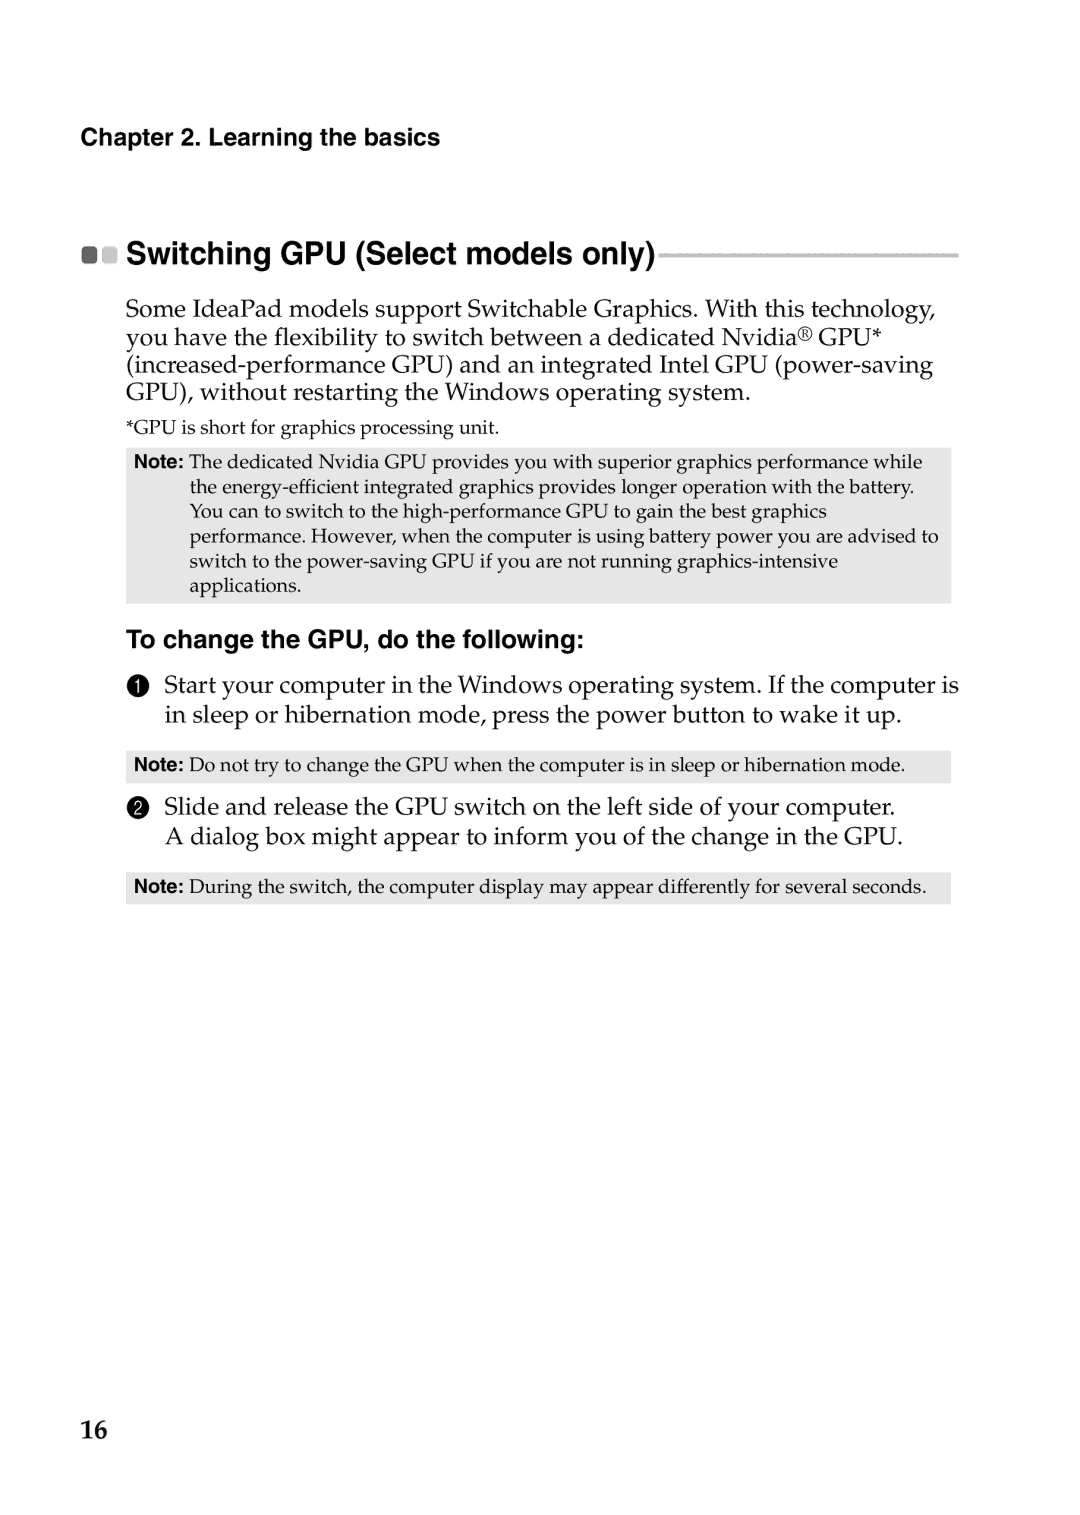 Lenovo V370 manual Switching GPU Select models only, To change the GPU, do the following 